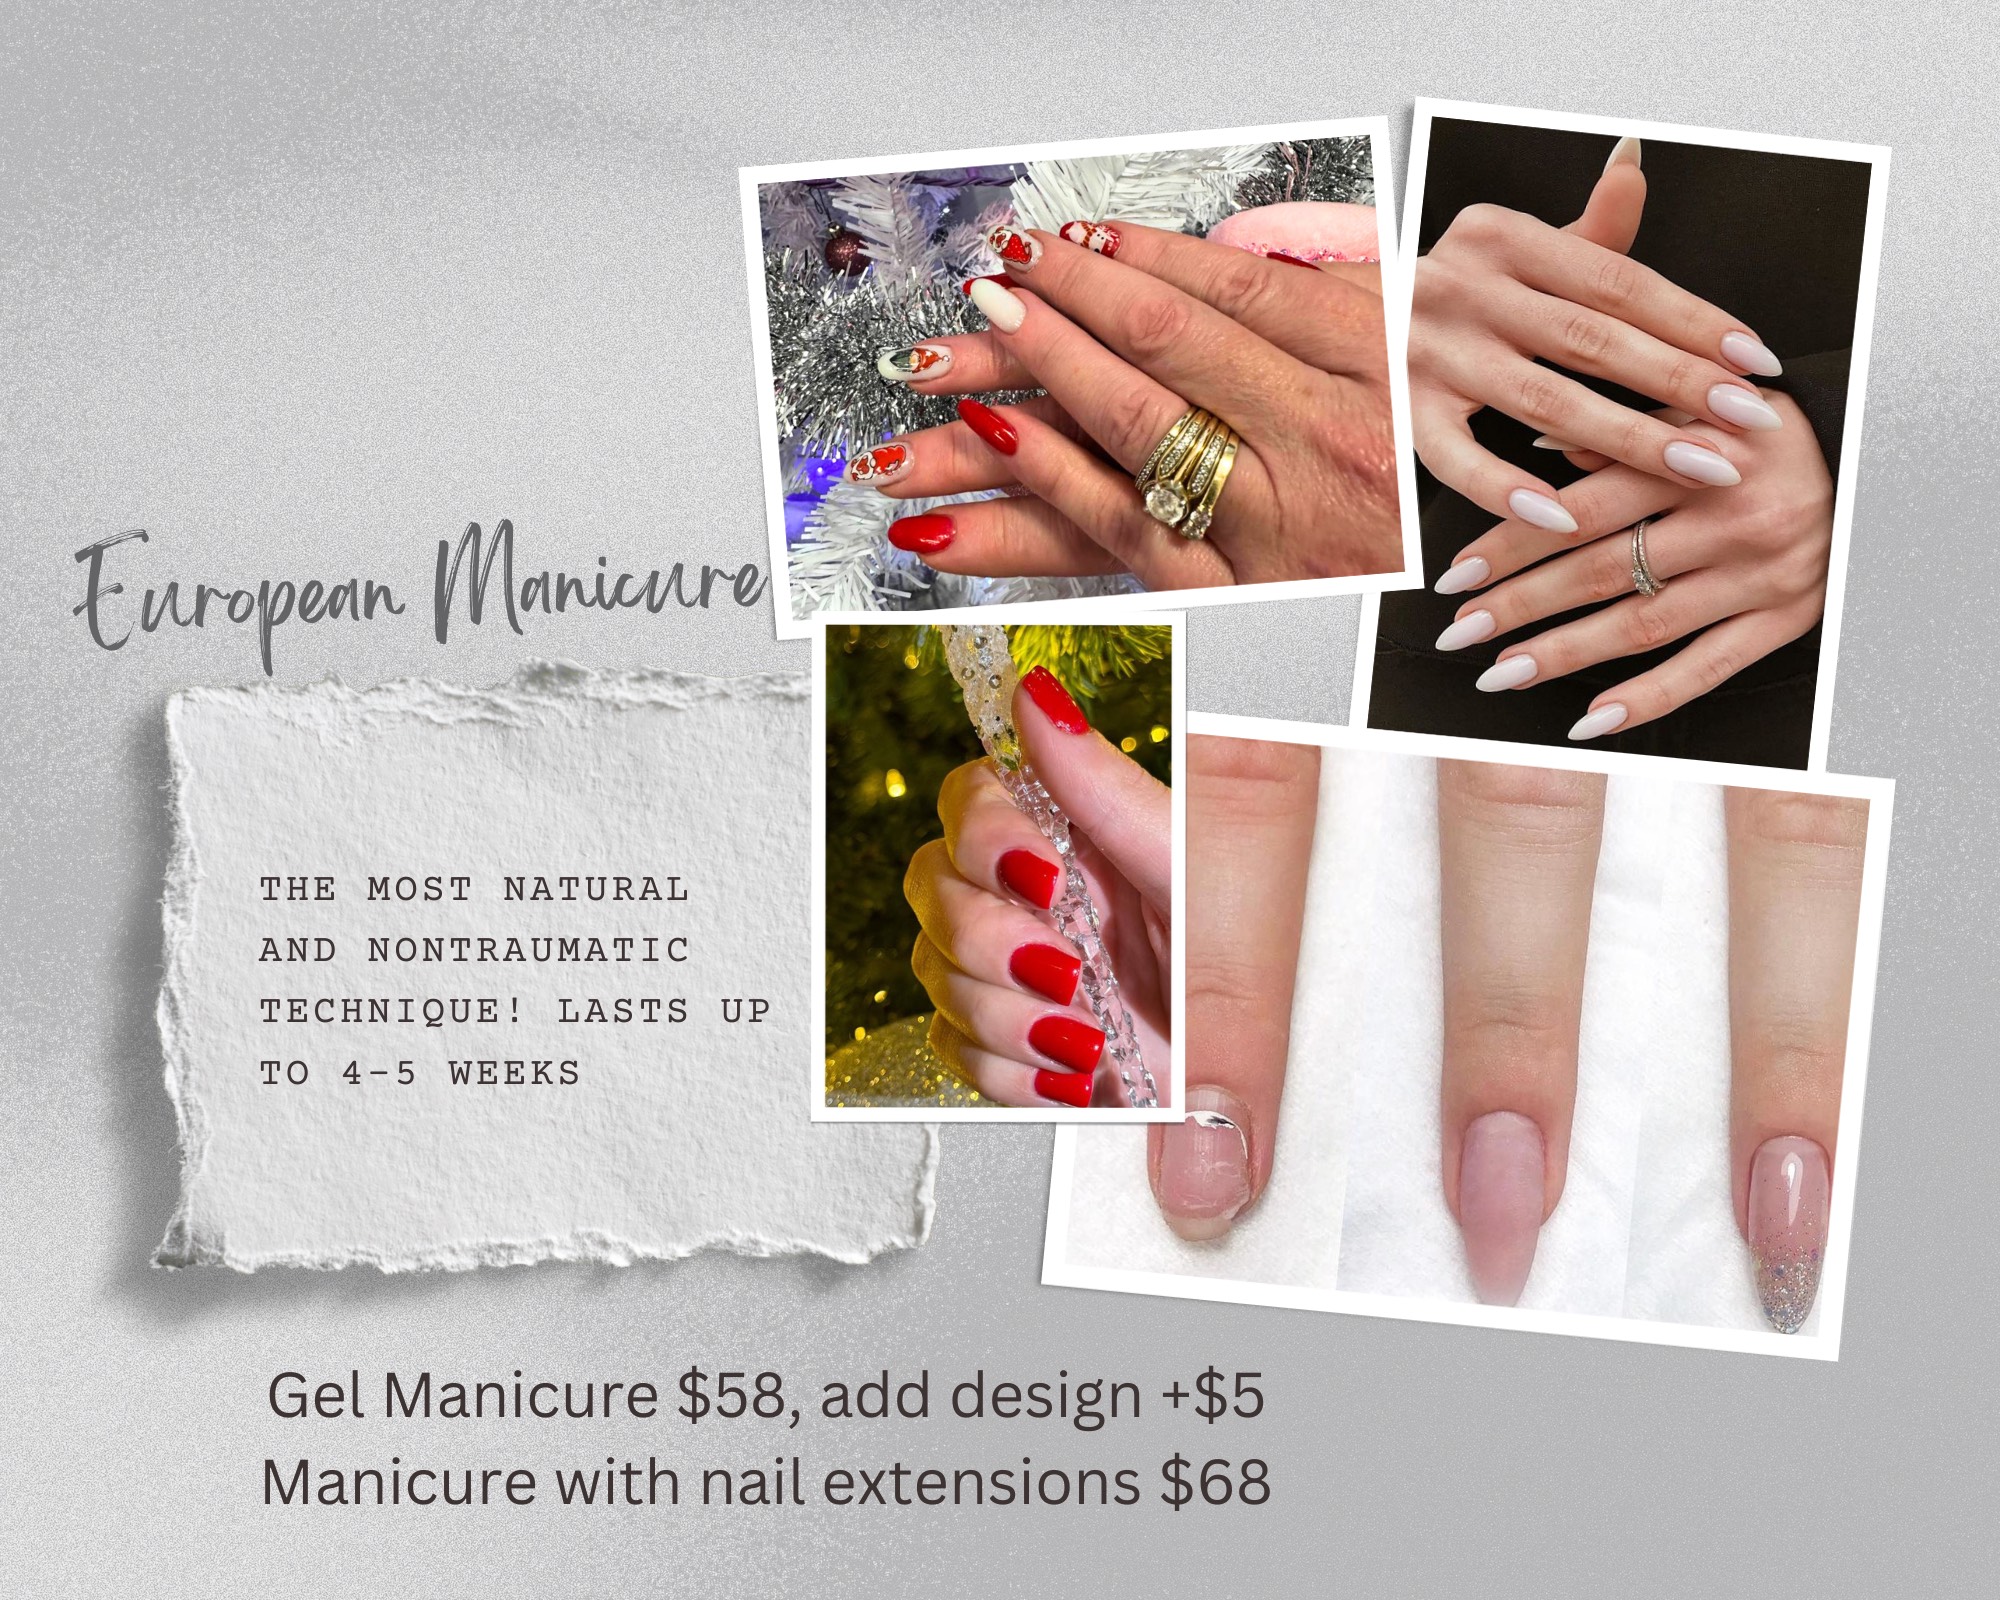 The Best Nails San Diego - Nail Designs